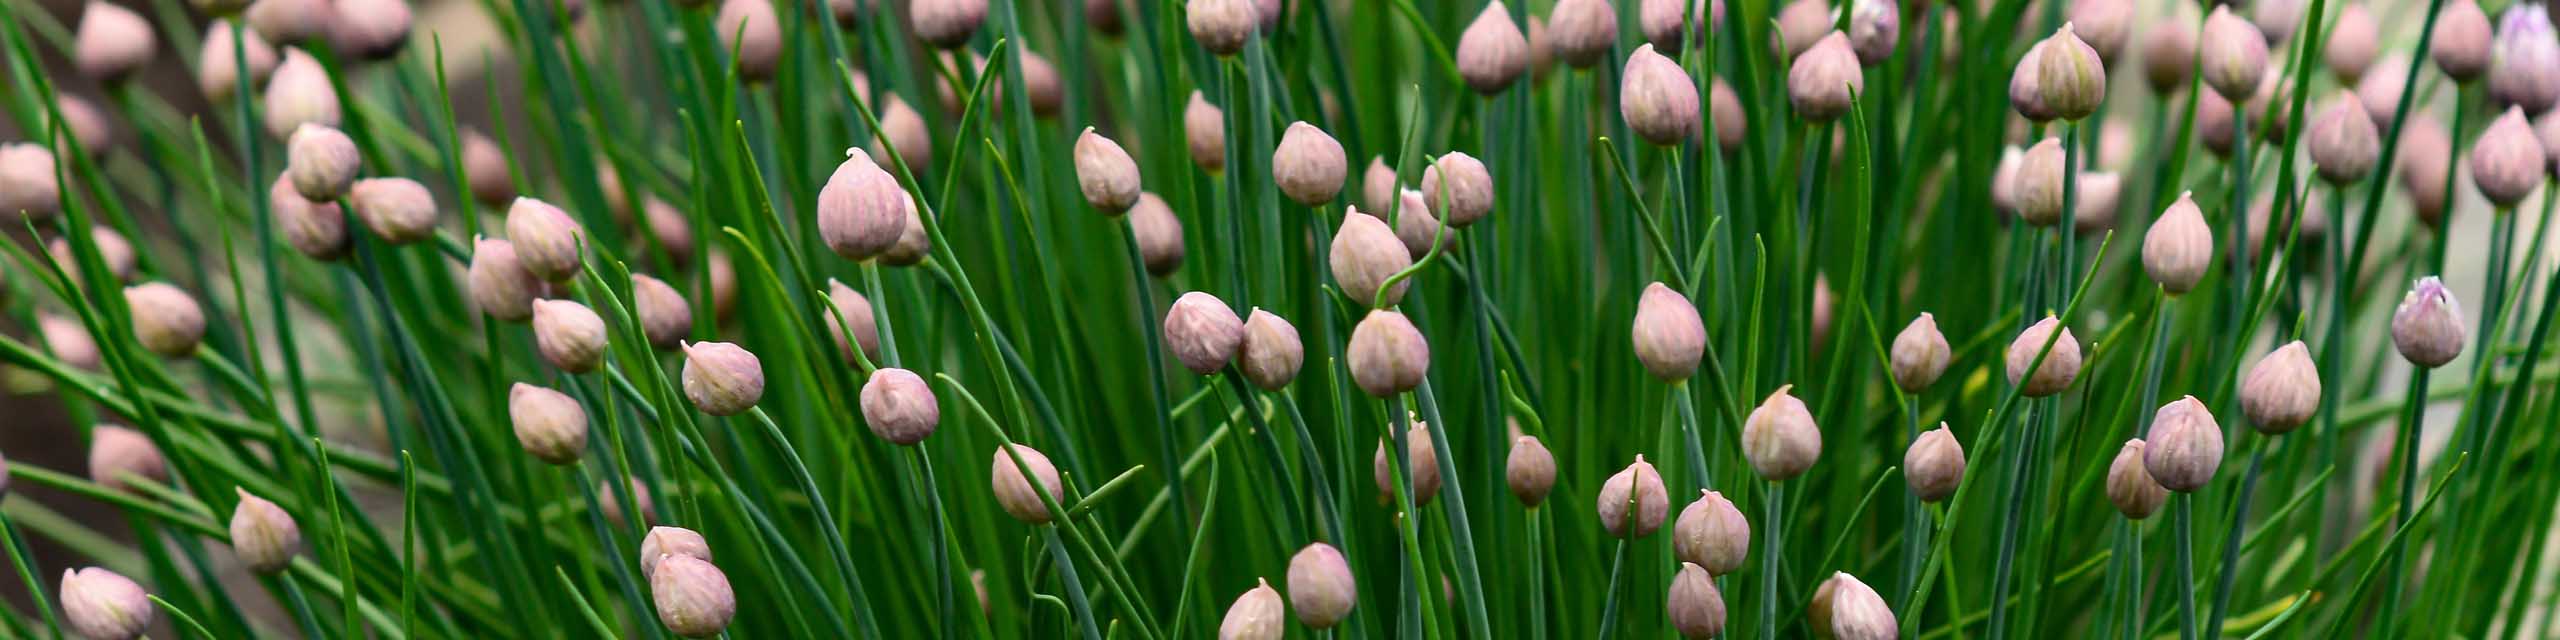 Leaves and seed buds of chives growing in a herb garden.